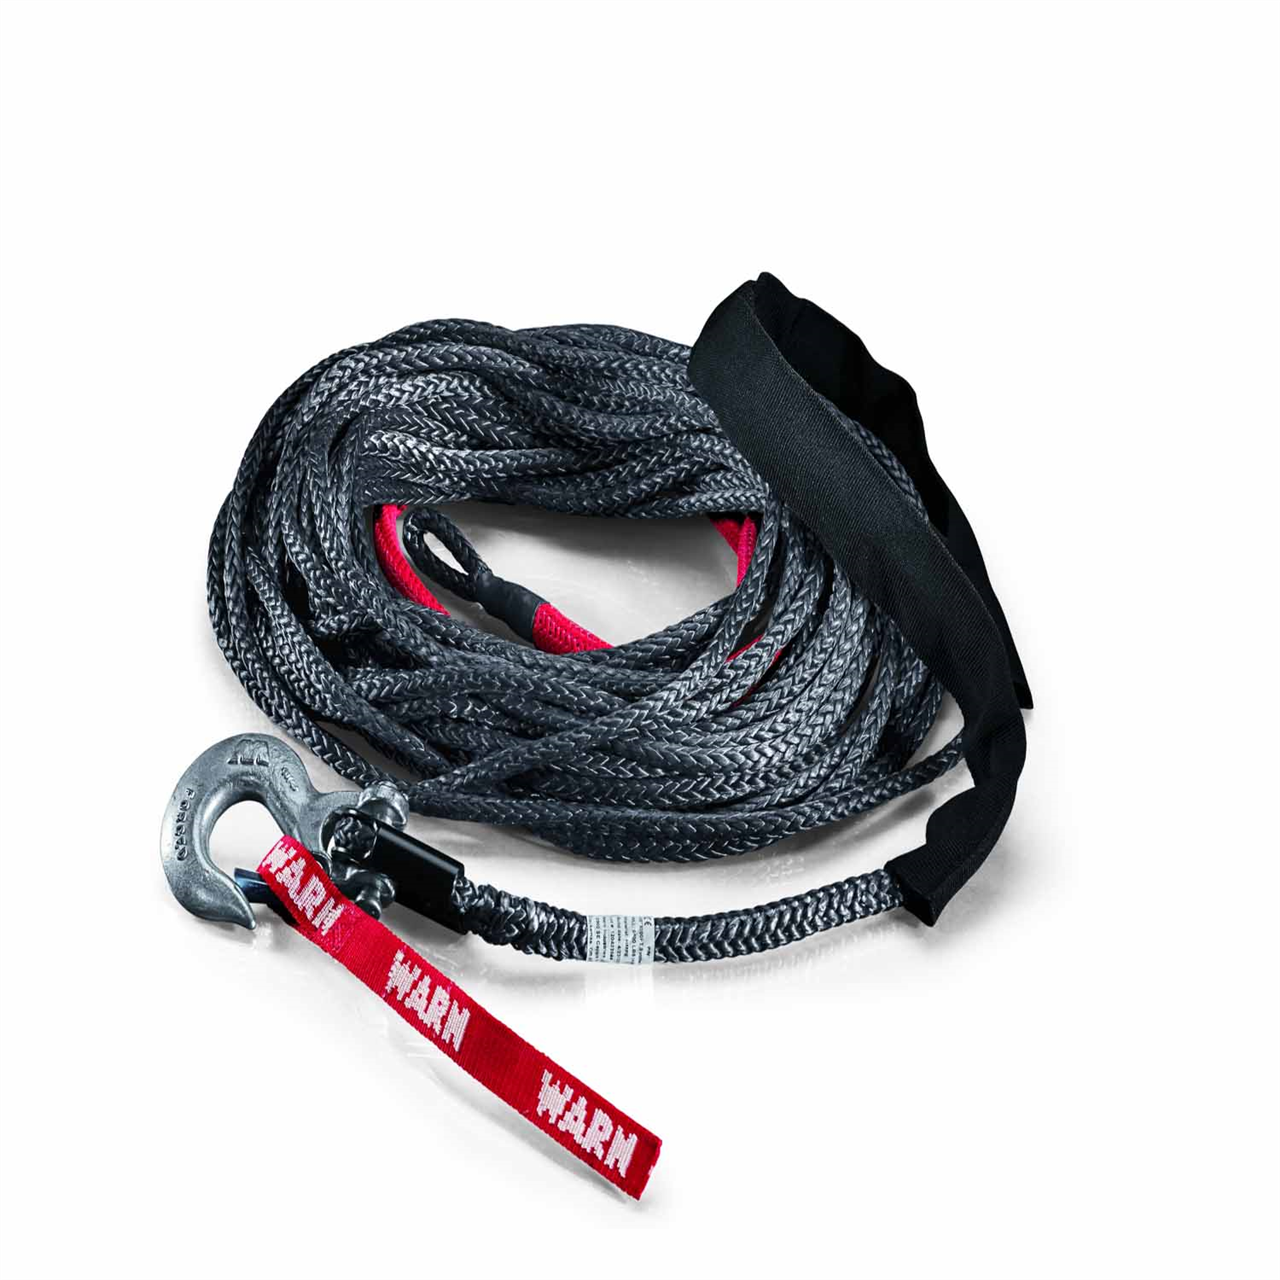 Warn synthetic rope kit 3/8x80